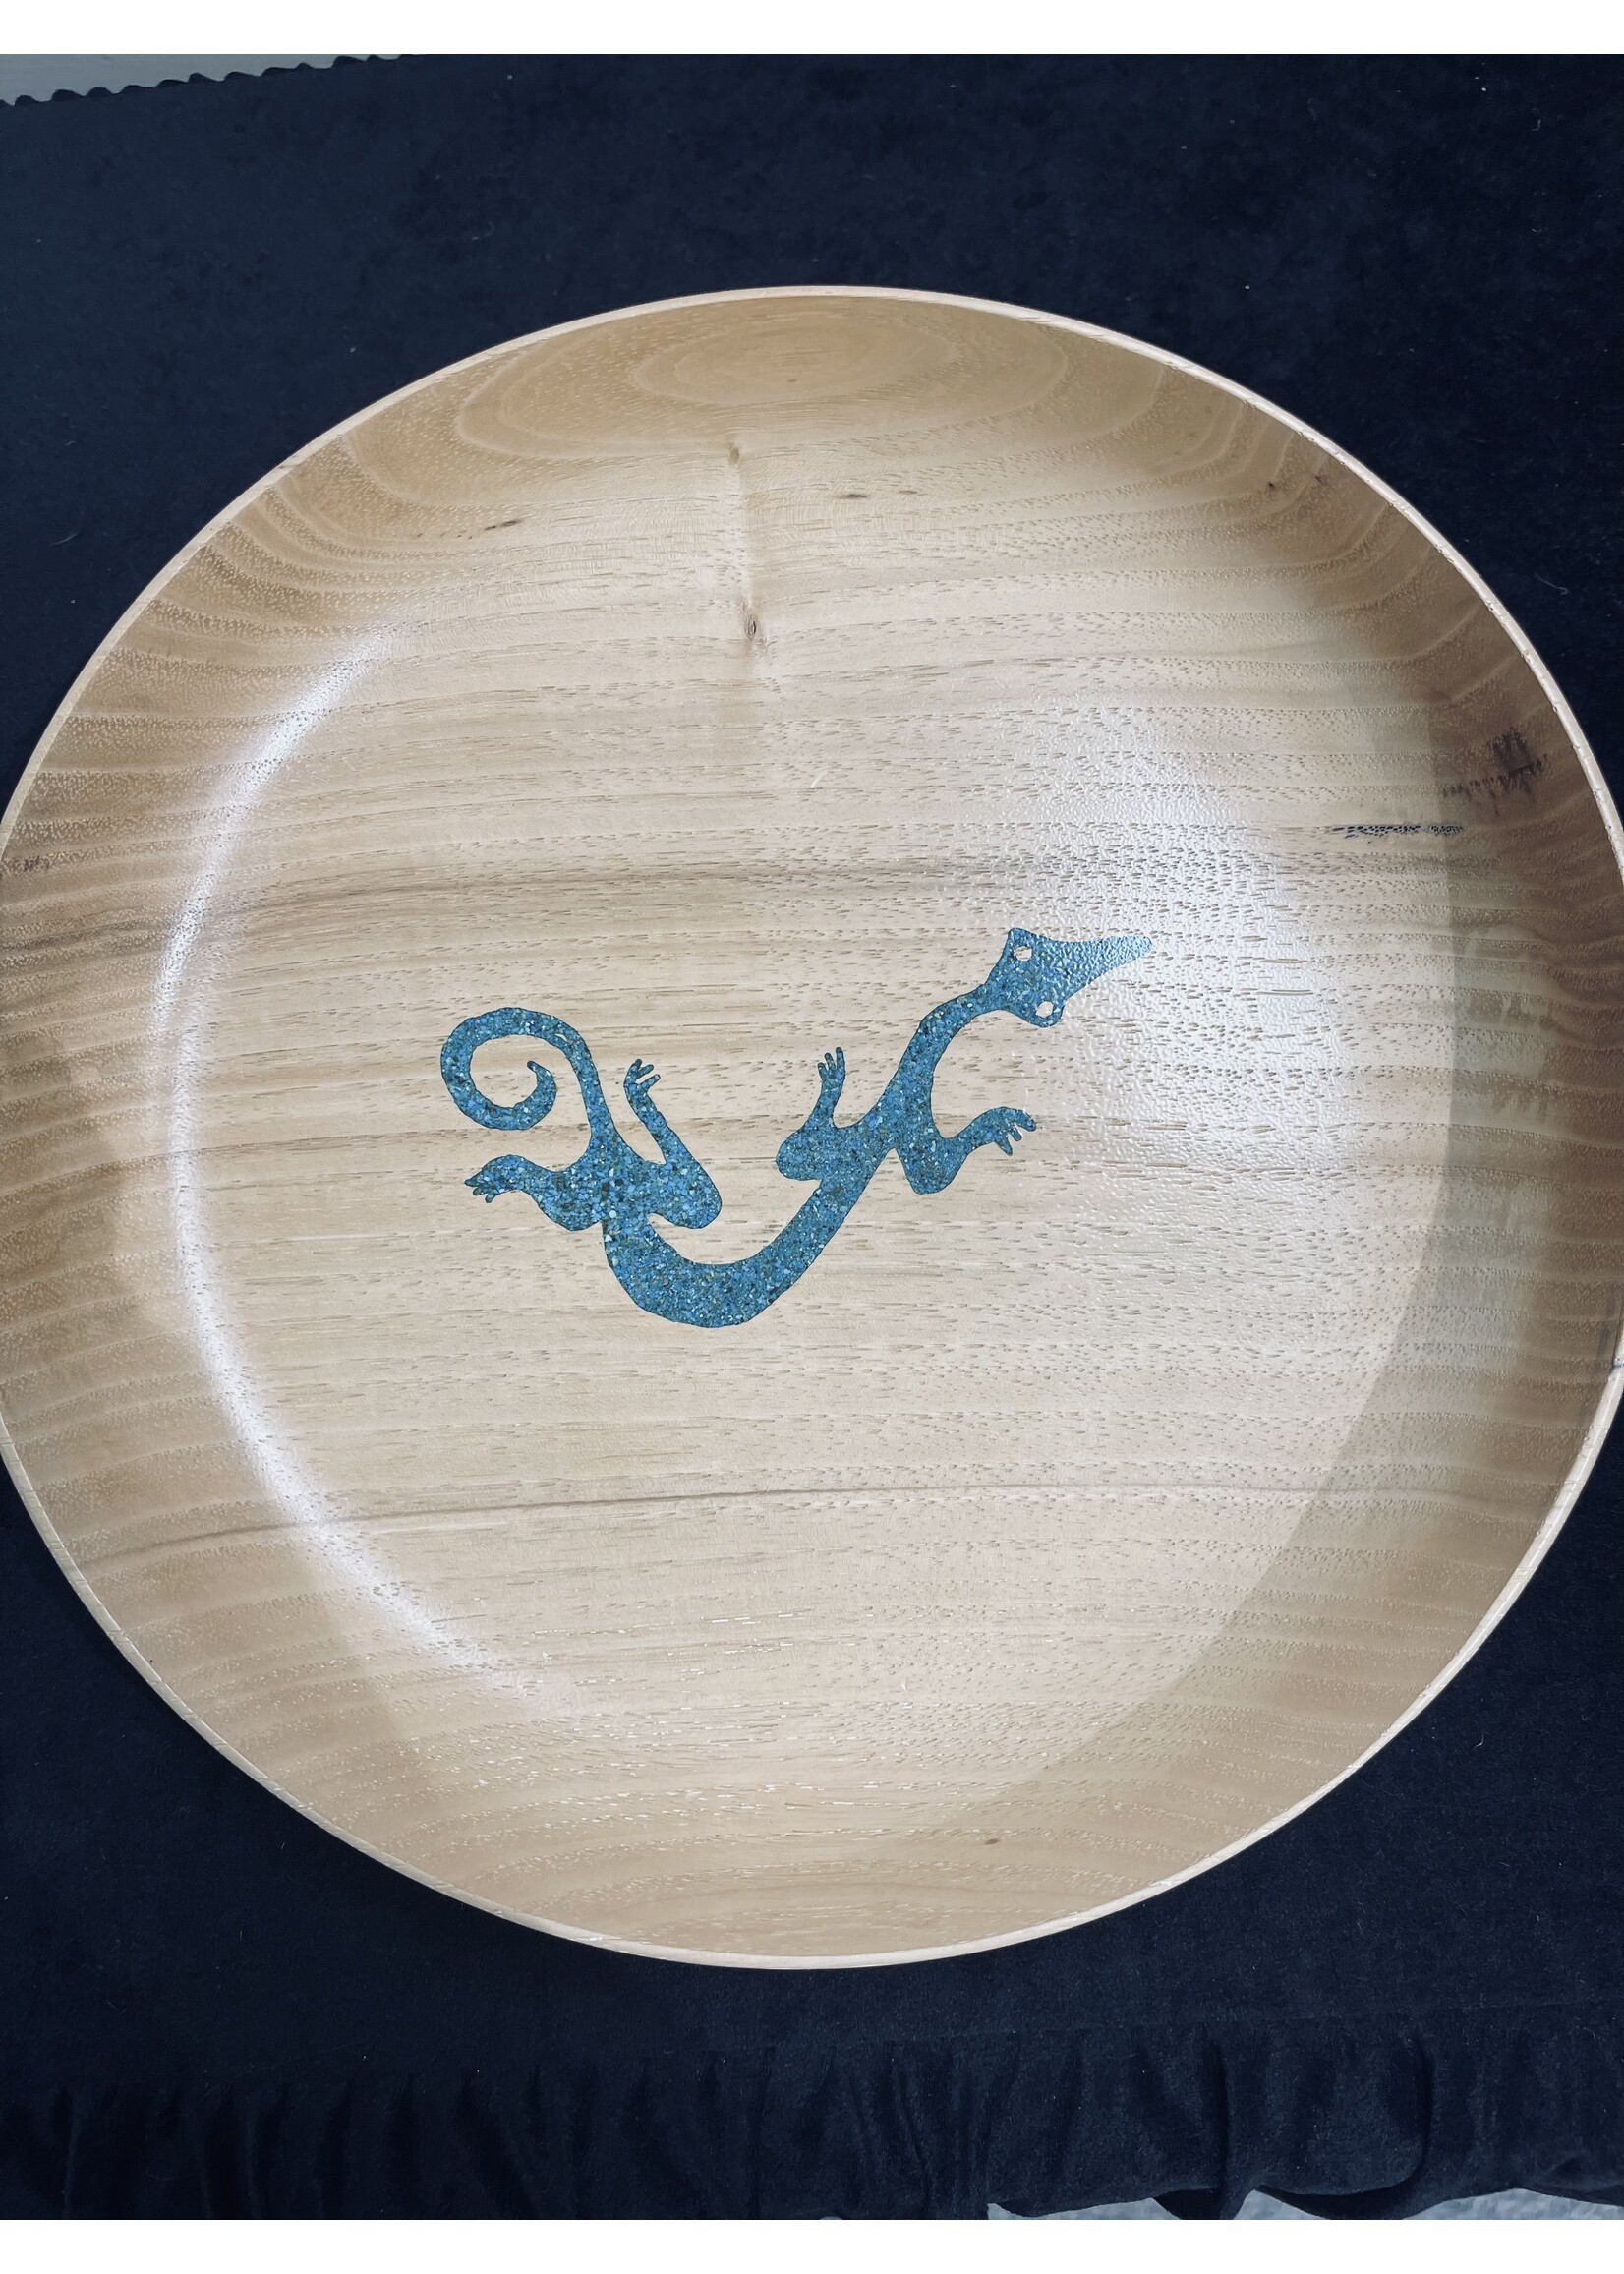 Ray Martha Rountree ROUN-Ray and Martha Rountree-100113-"Gecko in a Bowl"-Turned pecan platter inlaid with turquoise